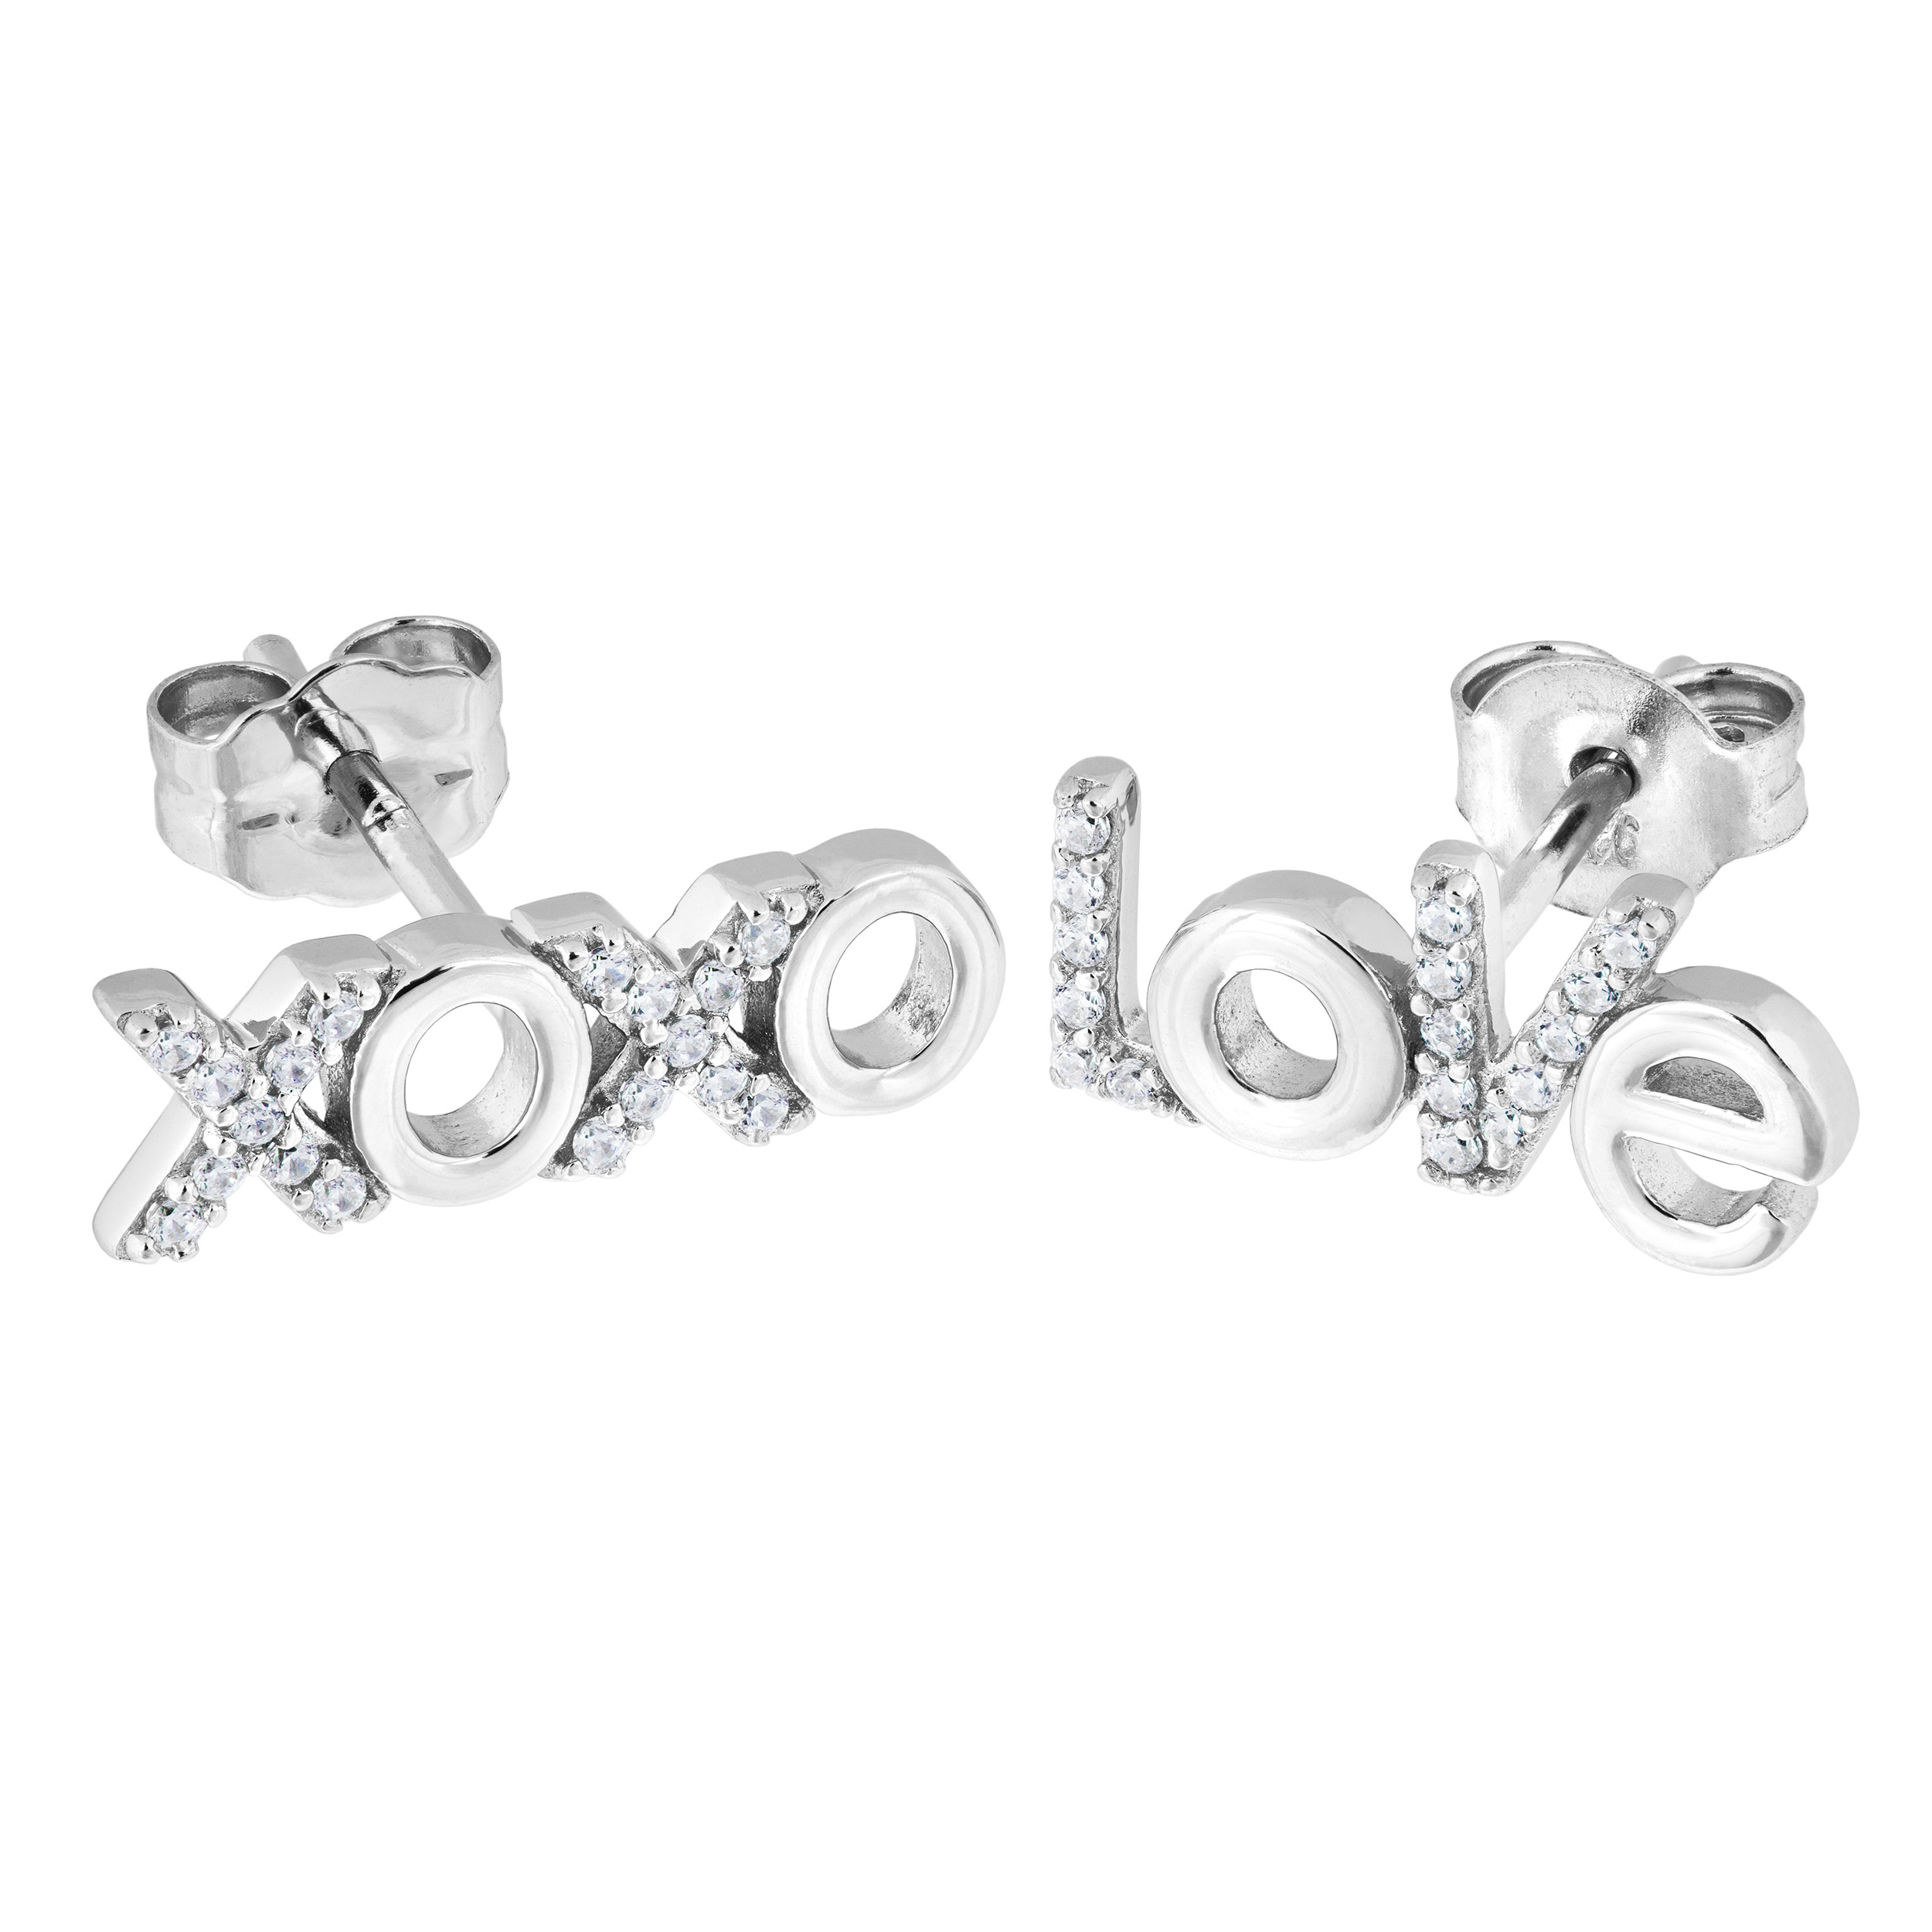 LOVE' and 'XOXO' Cubic Zirconia Earrings, Rhodium Plated Sterling Silver